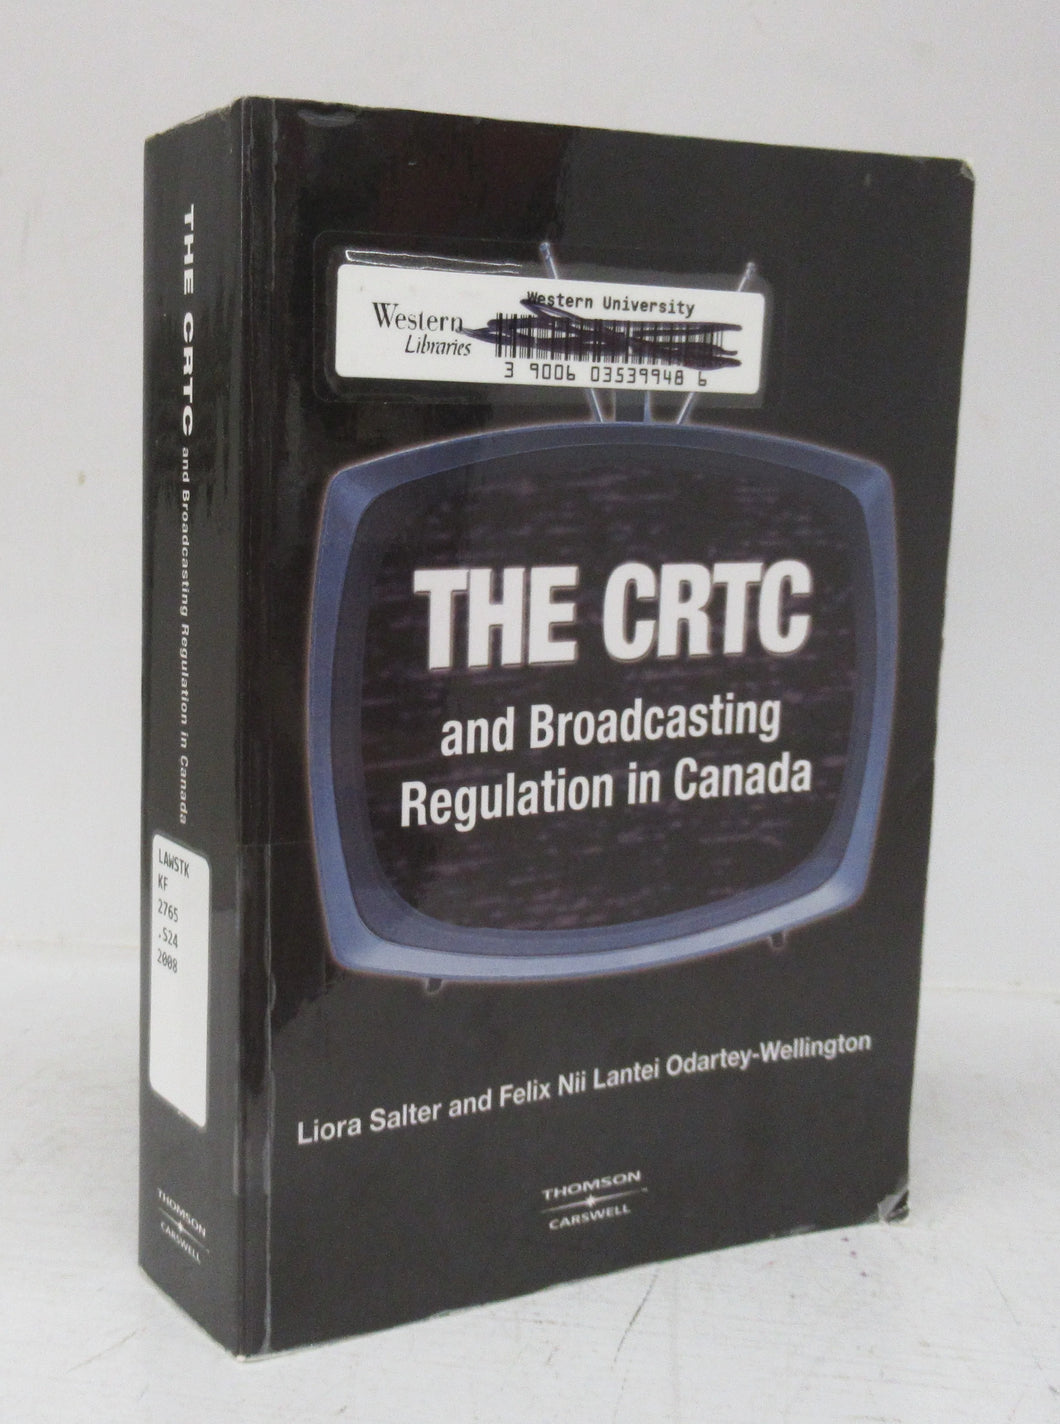 The CRTC and Broadcasting Regulation in Canada